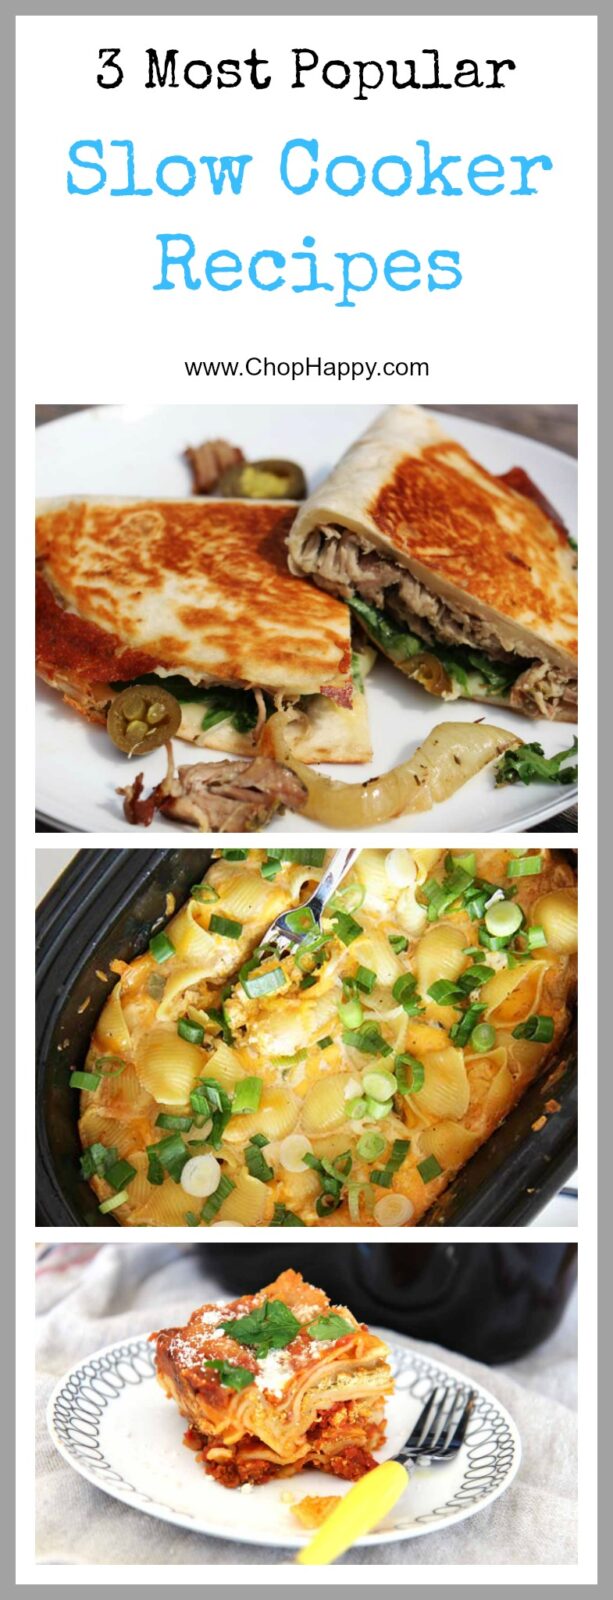 3 Most Popular Slow Cooker Recipes - because they are easy and so decadent. Grab your crock pot, cheese, pork, and pasta and lets get cooking. www.ChopHappy.com